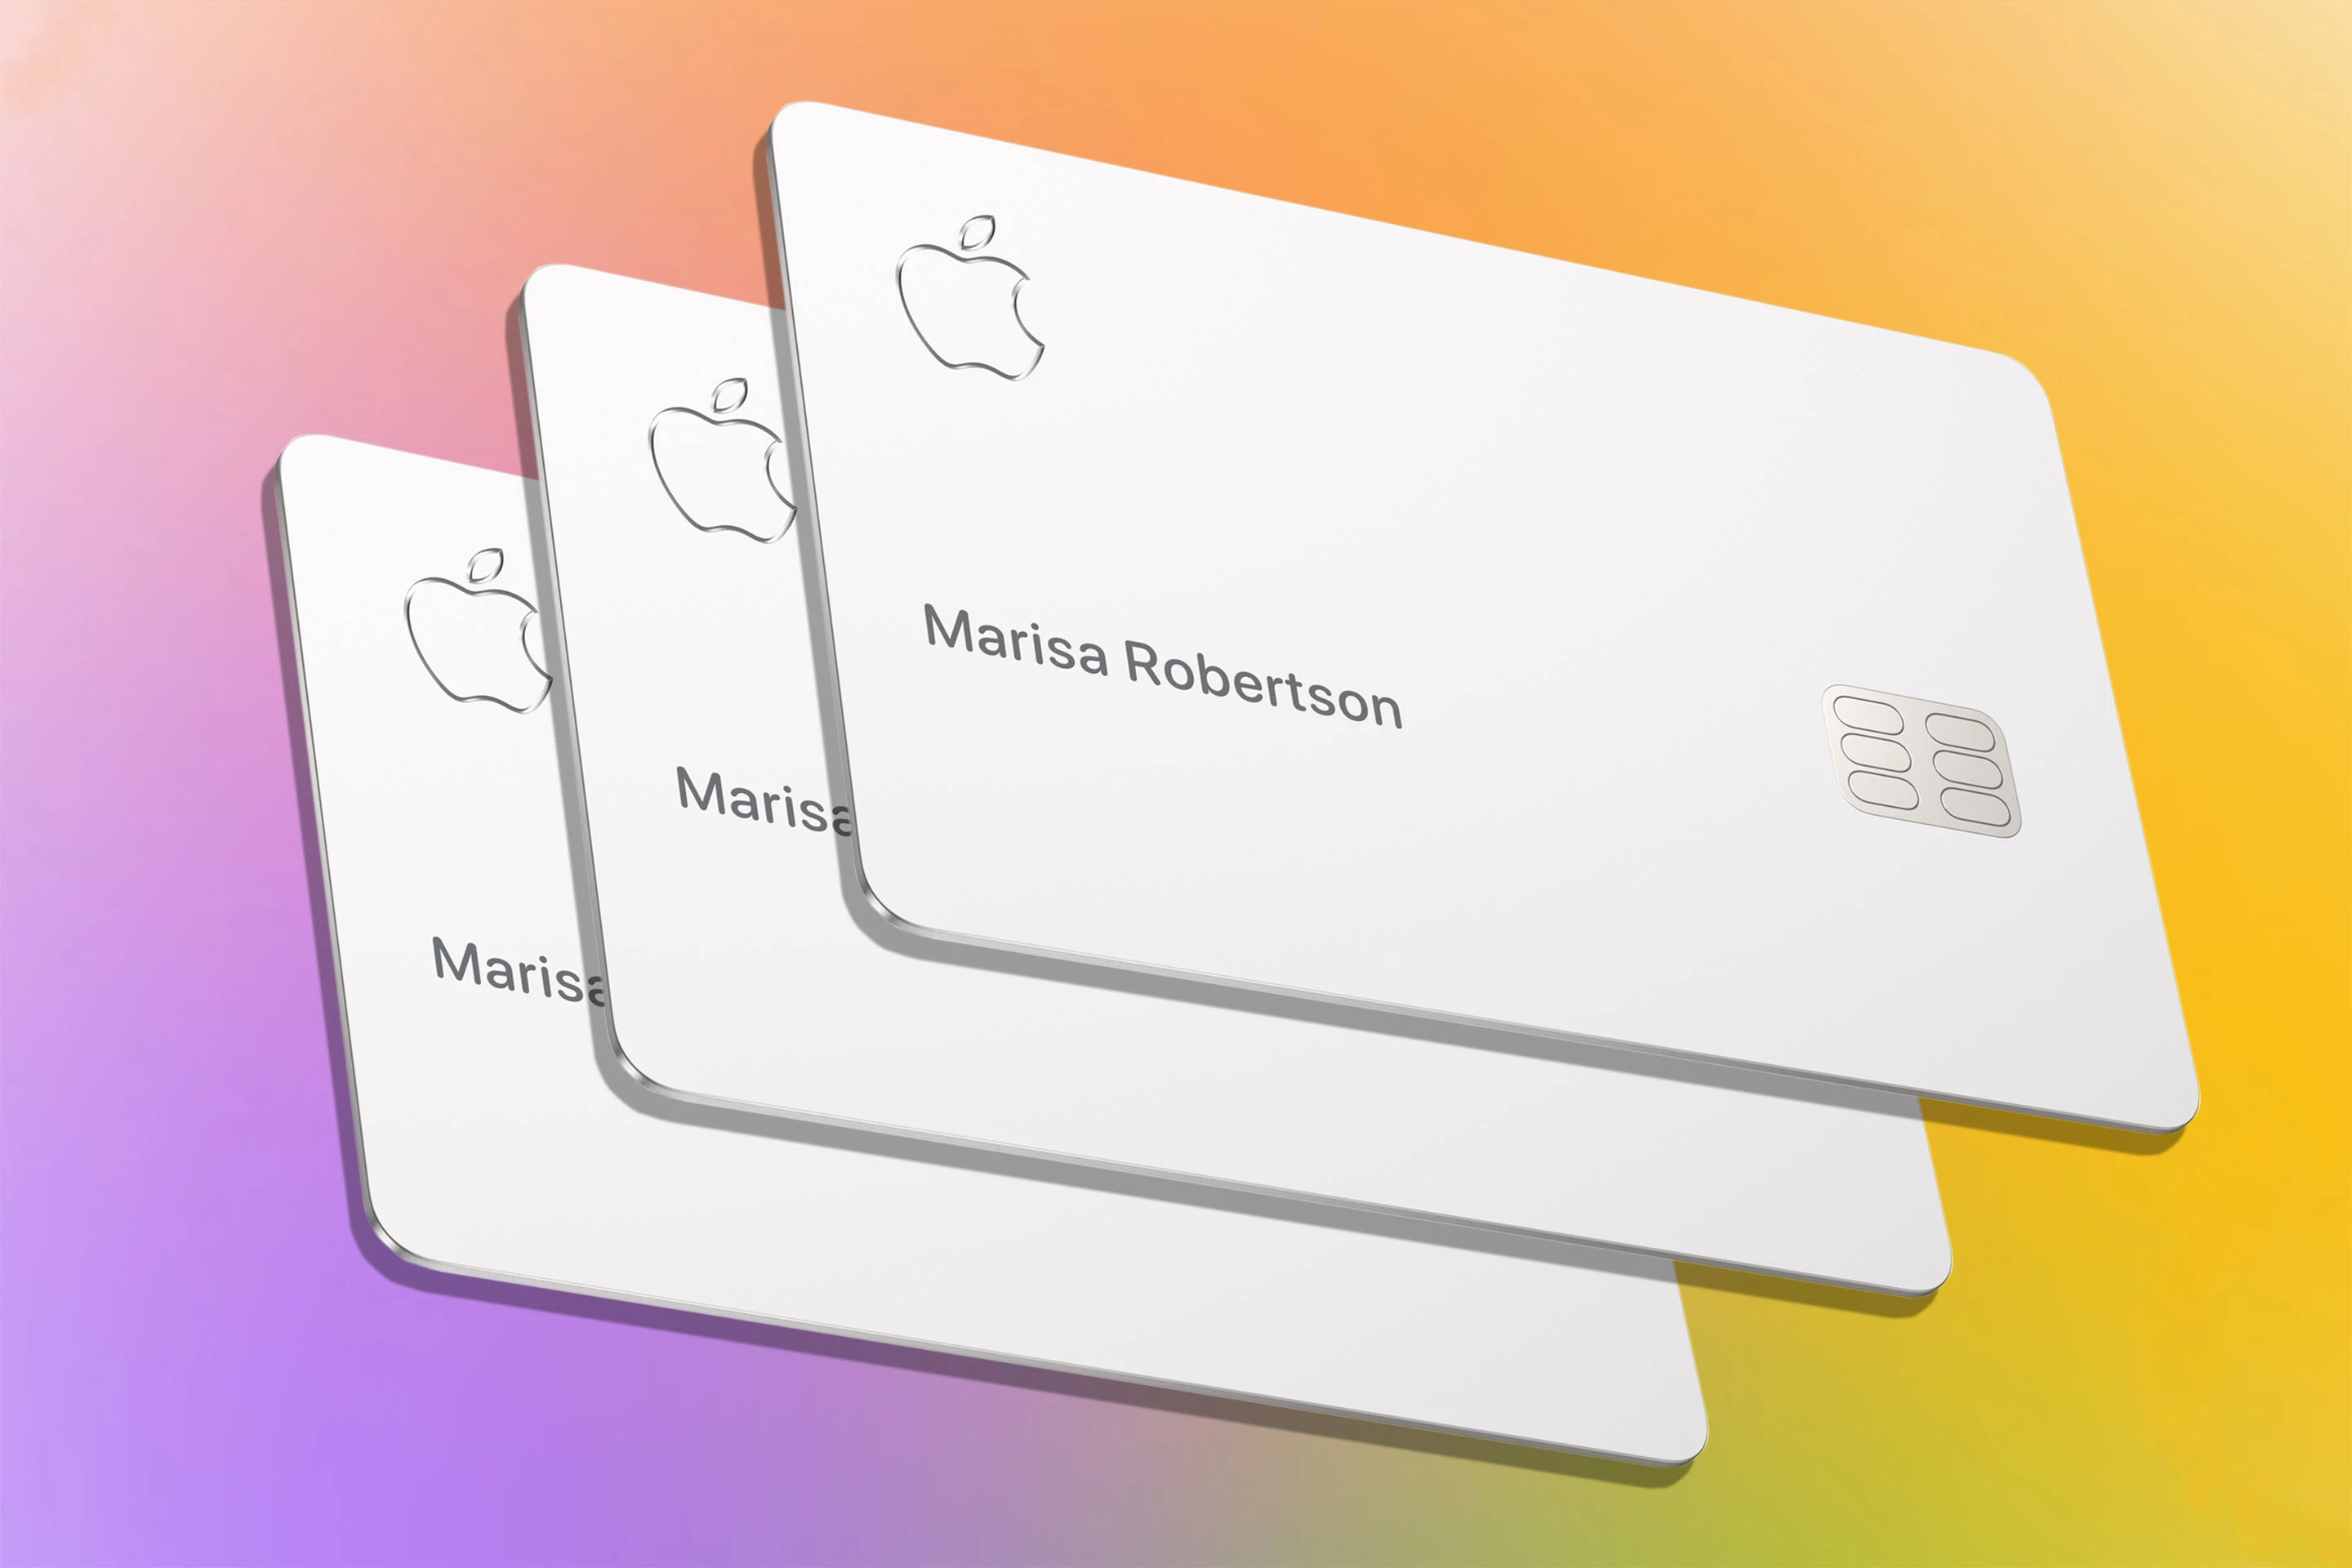 Learn how to apply for the Apple Card